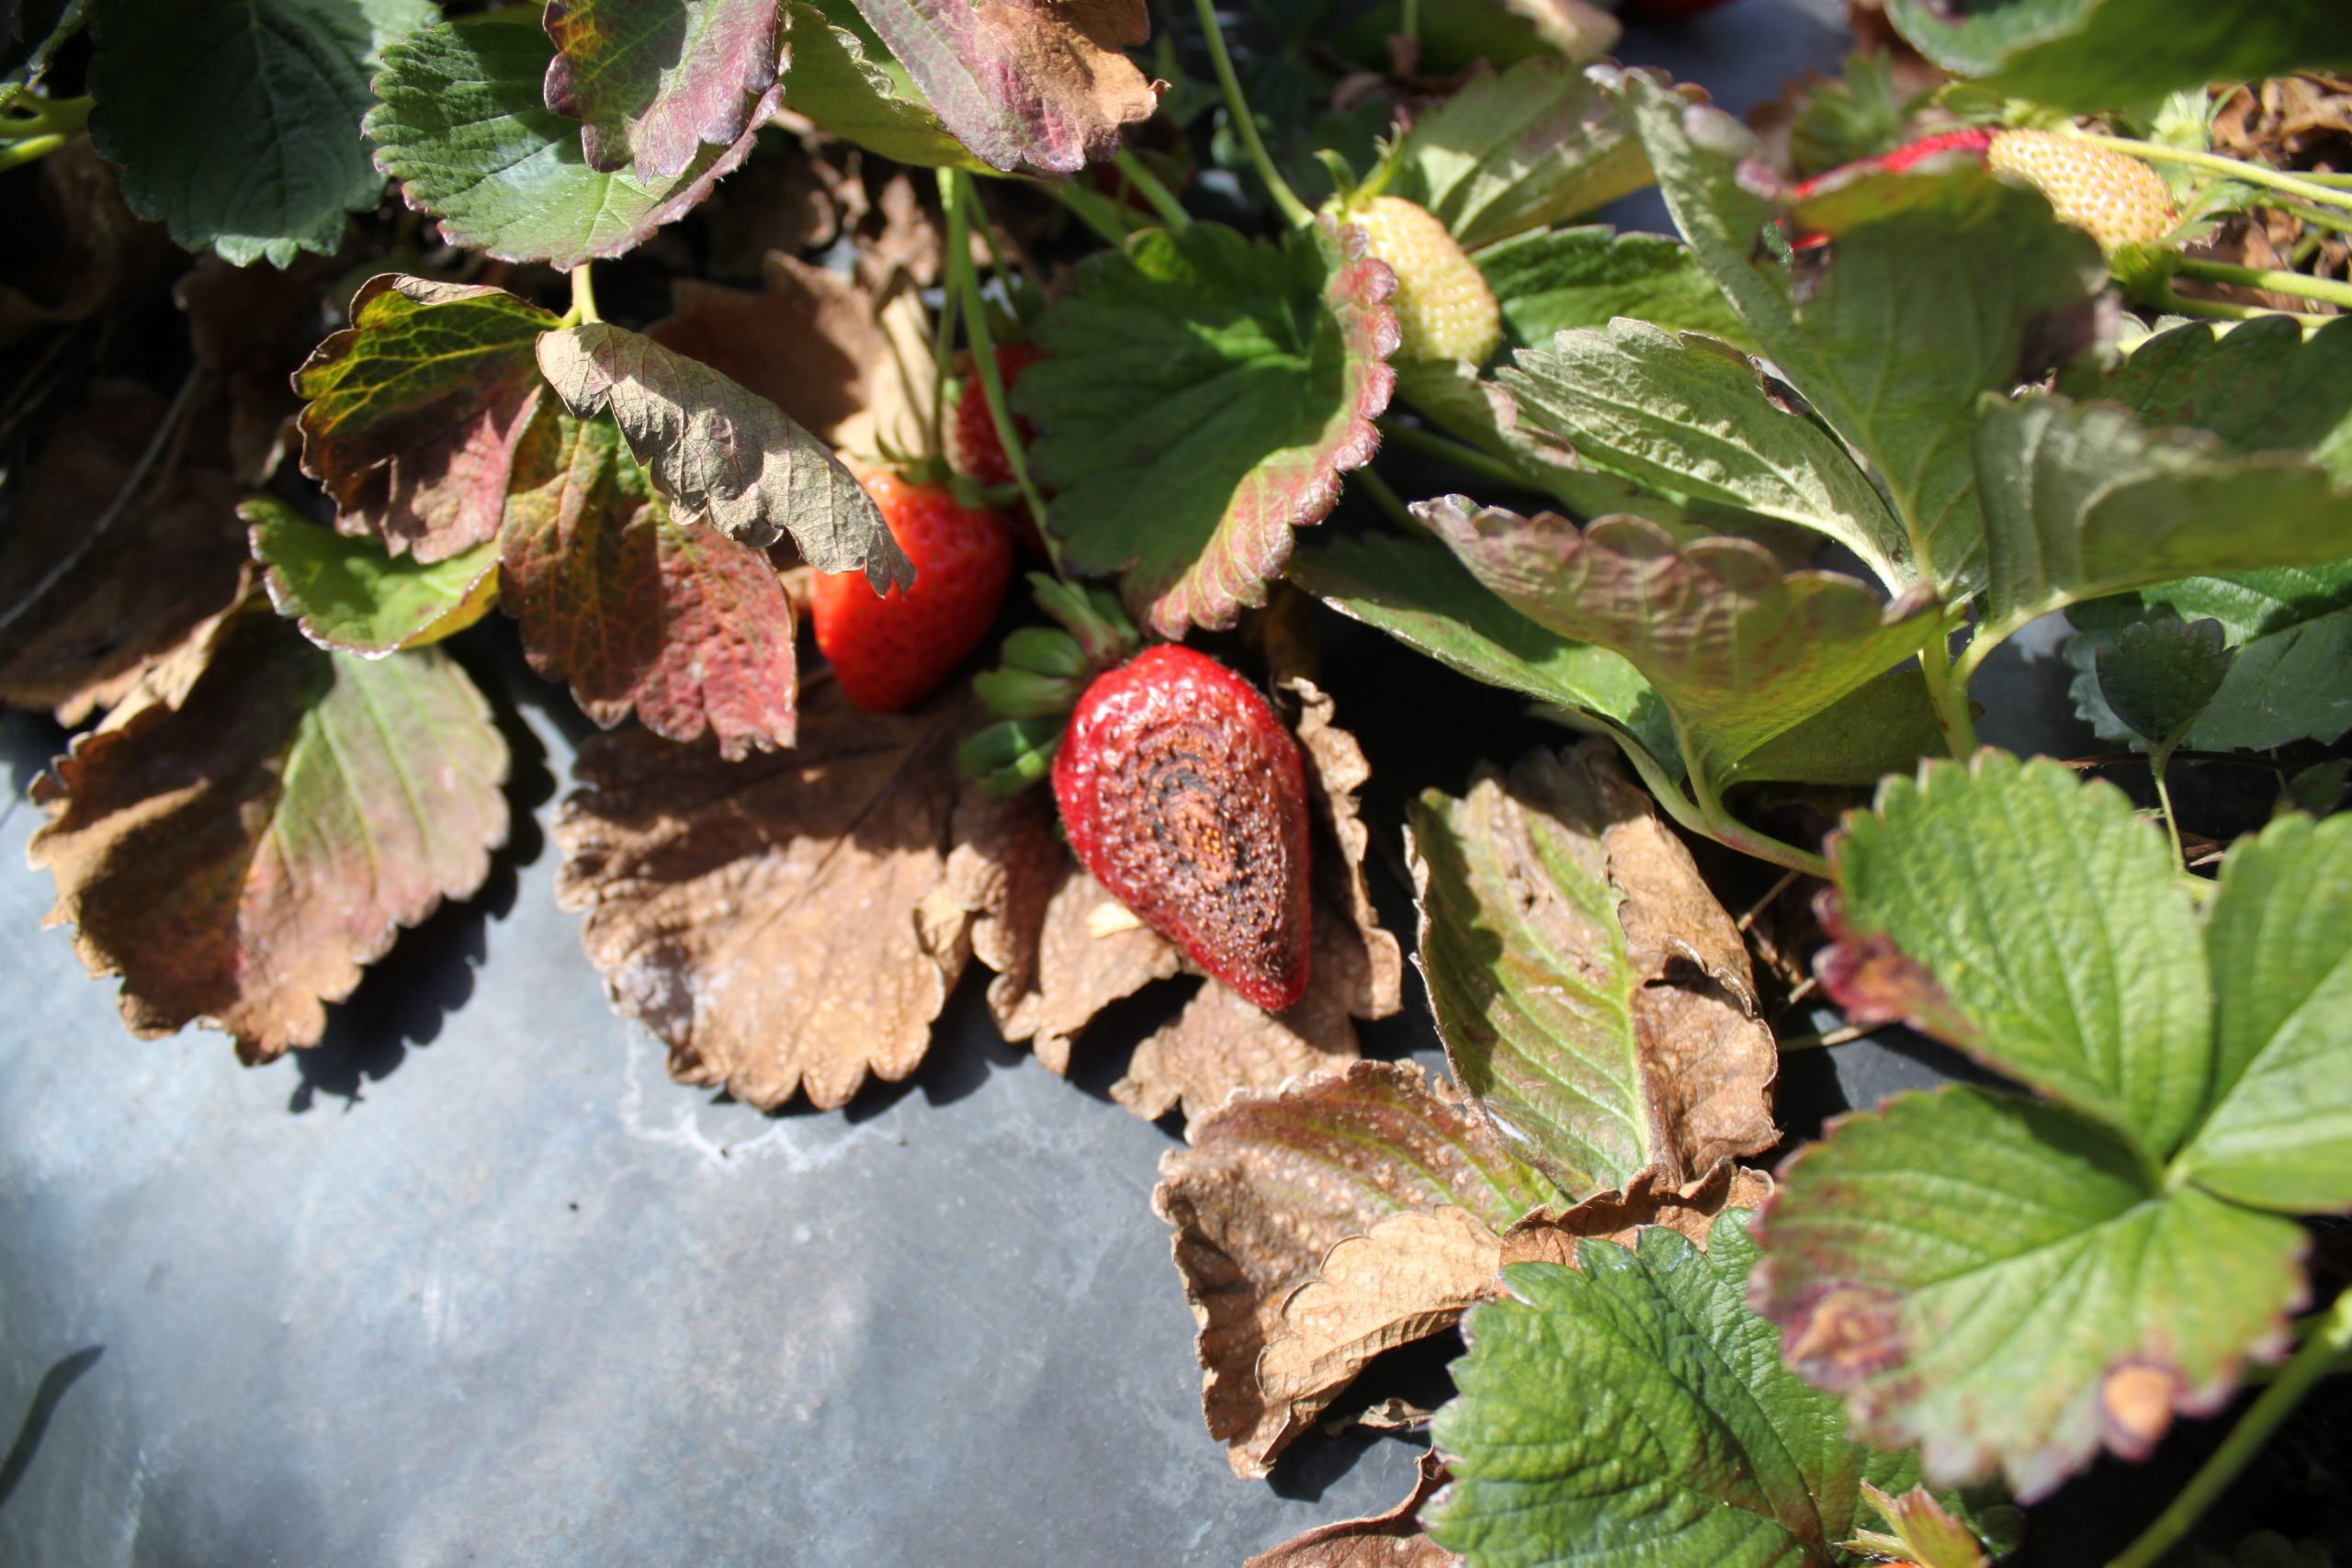 Featured image for “UF/IFAS Strawberry Specialist: Lack of Neopestalotiopsis a Blessing for Producers”